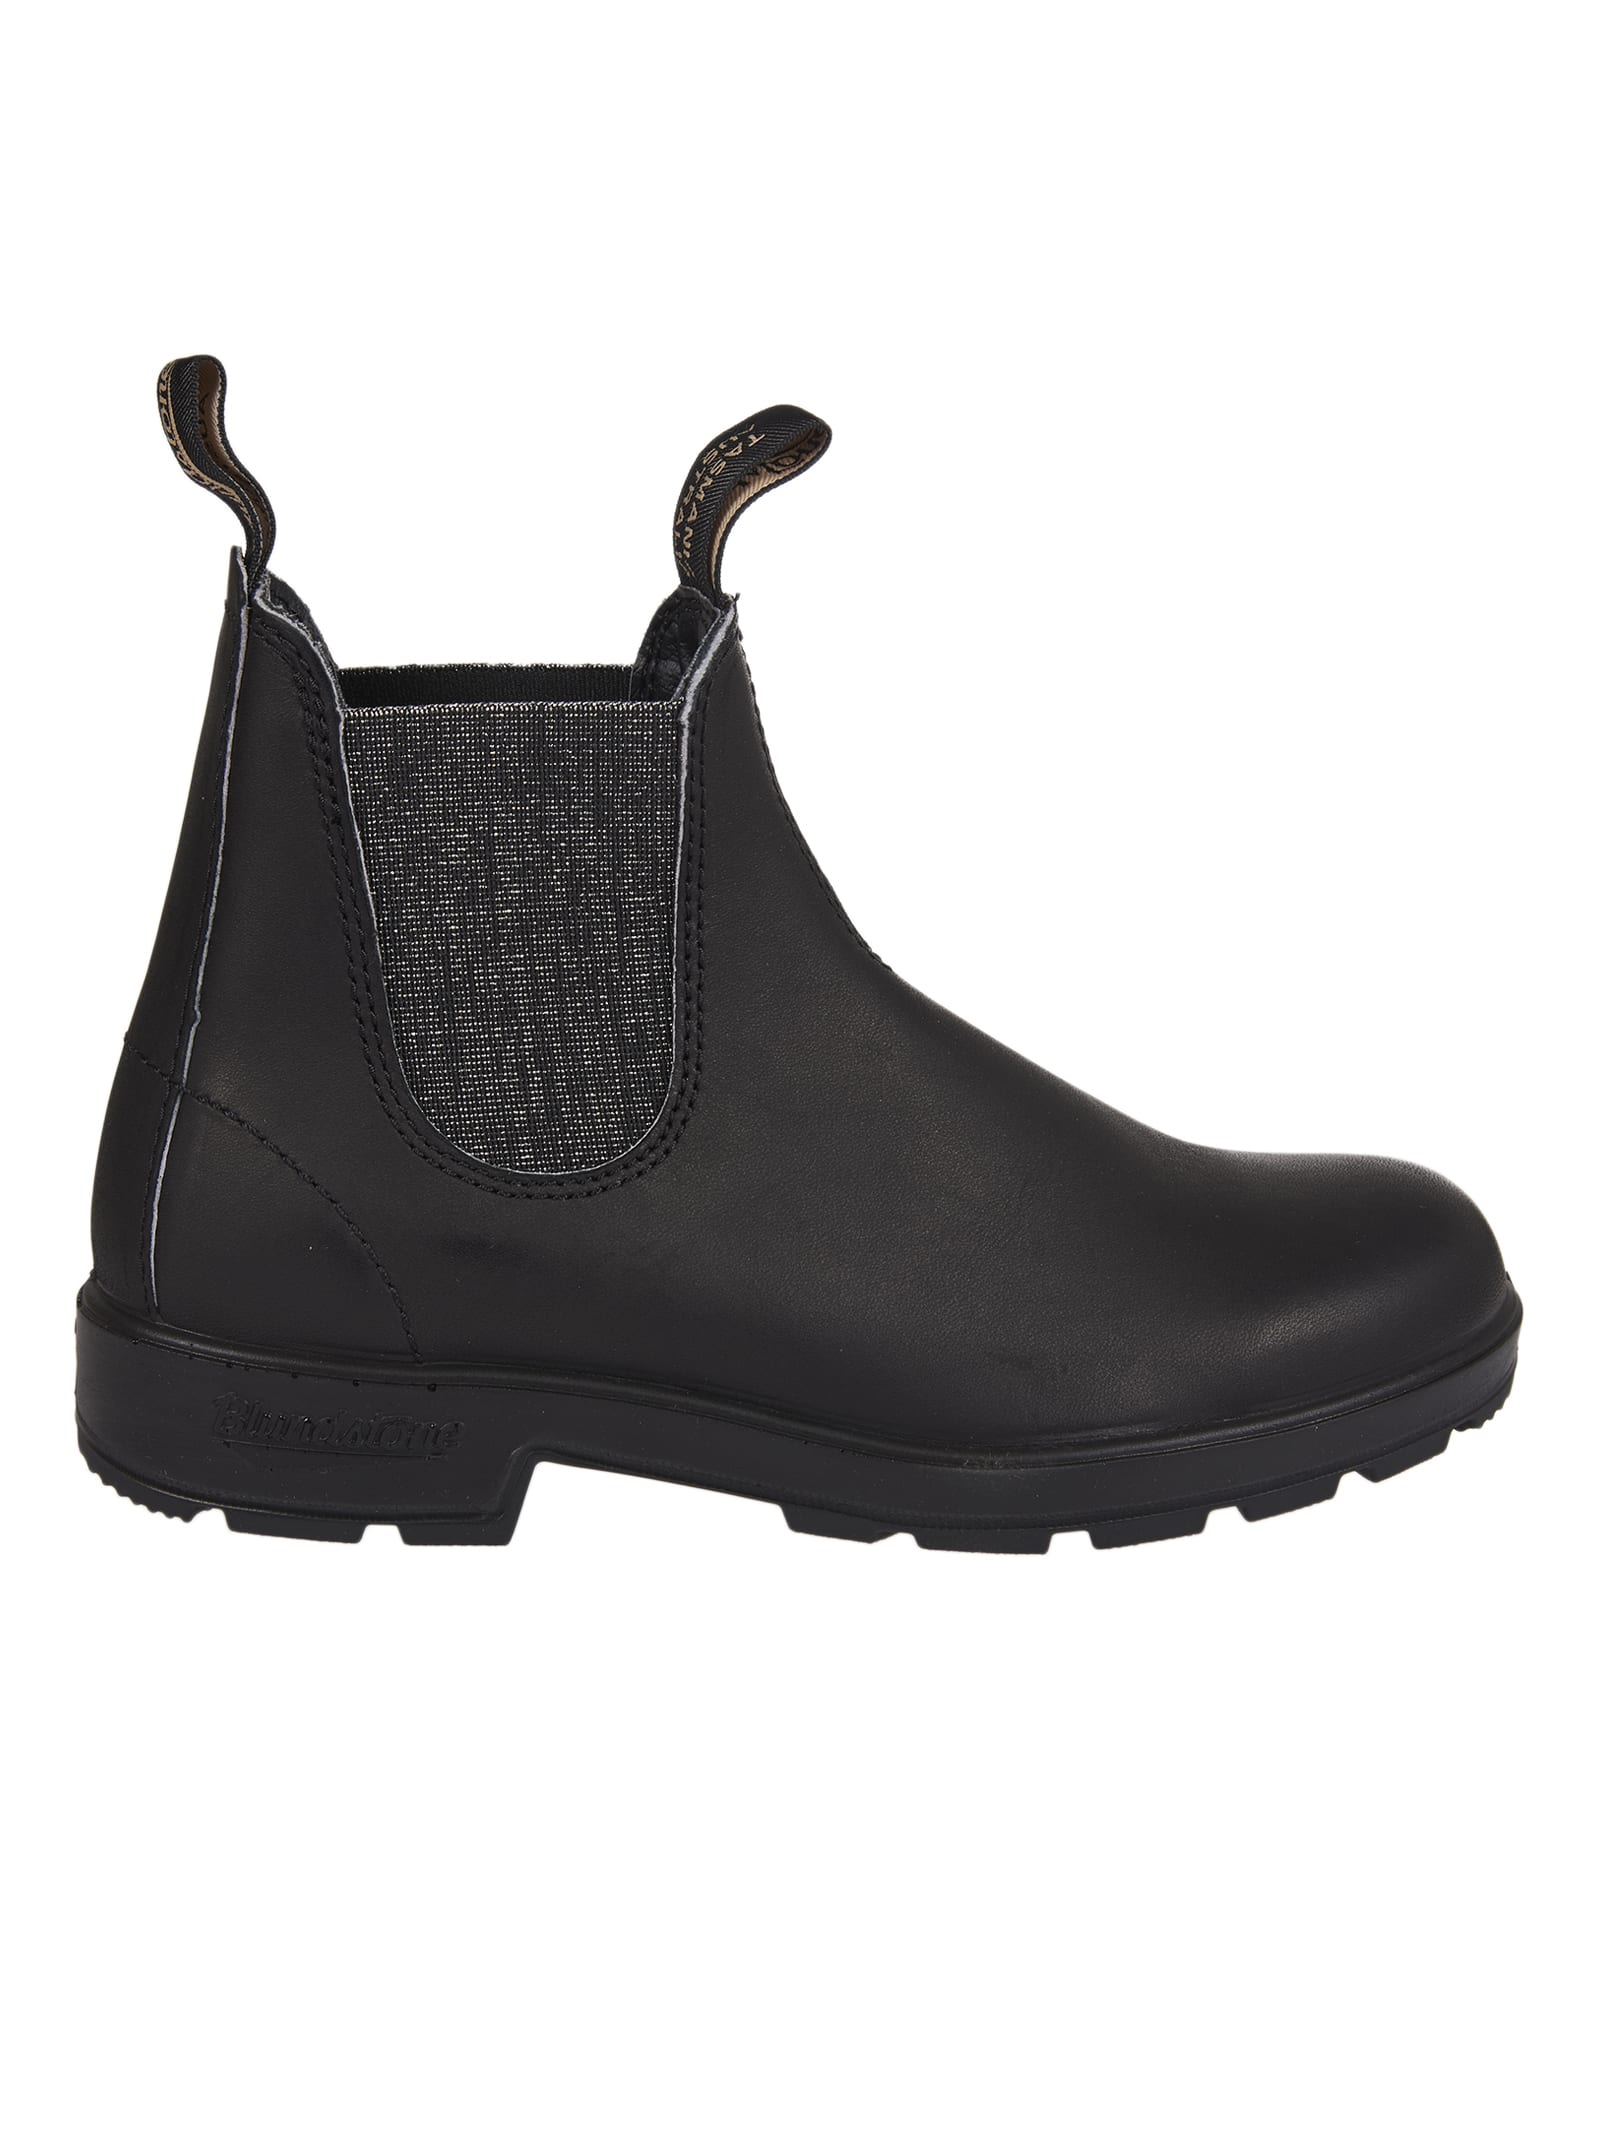 Blundstone Boots 2032 With Silver Glitter Side Bands